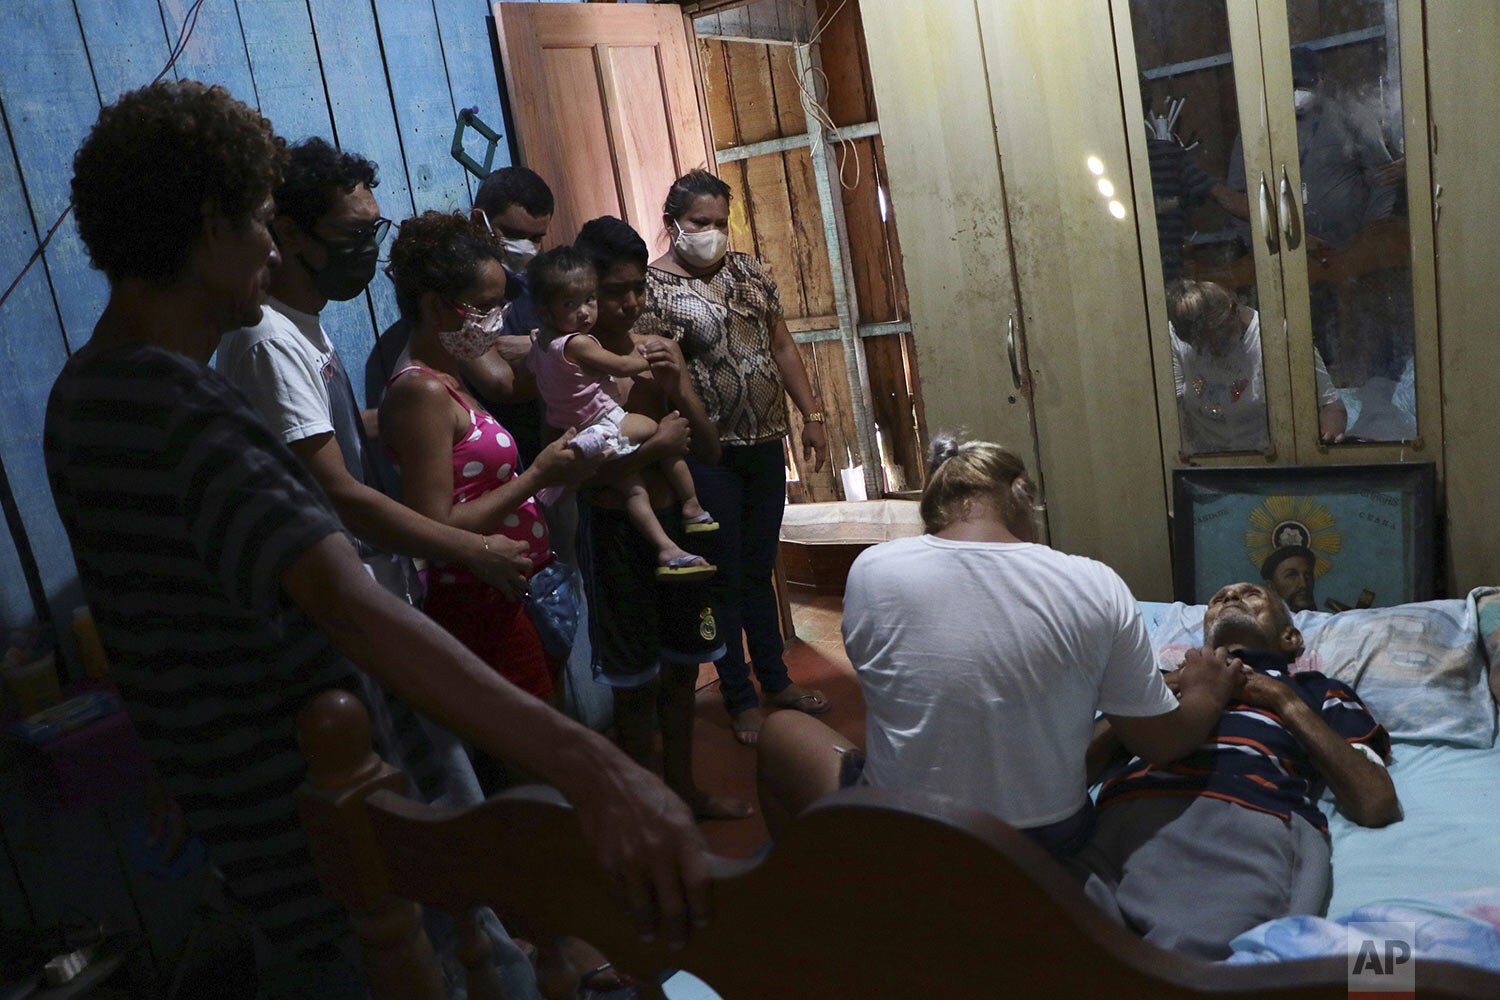  Relatives gather around the body of Raimundo Costa do Nascimento, 86, who died at home amid the new coronavirus pandemic in the Sao Jorge neighborhood in Manaus, Brazil, Thursday, April 30, 2020. According to the family Costa do Nascimento died of p